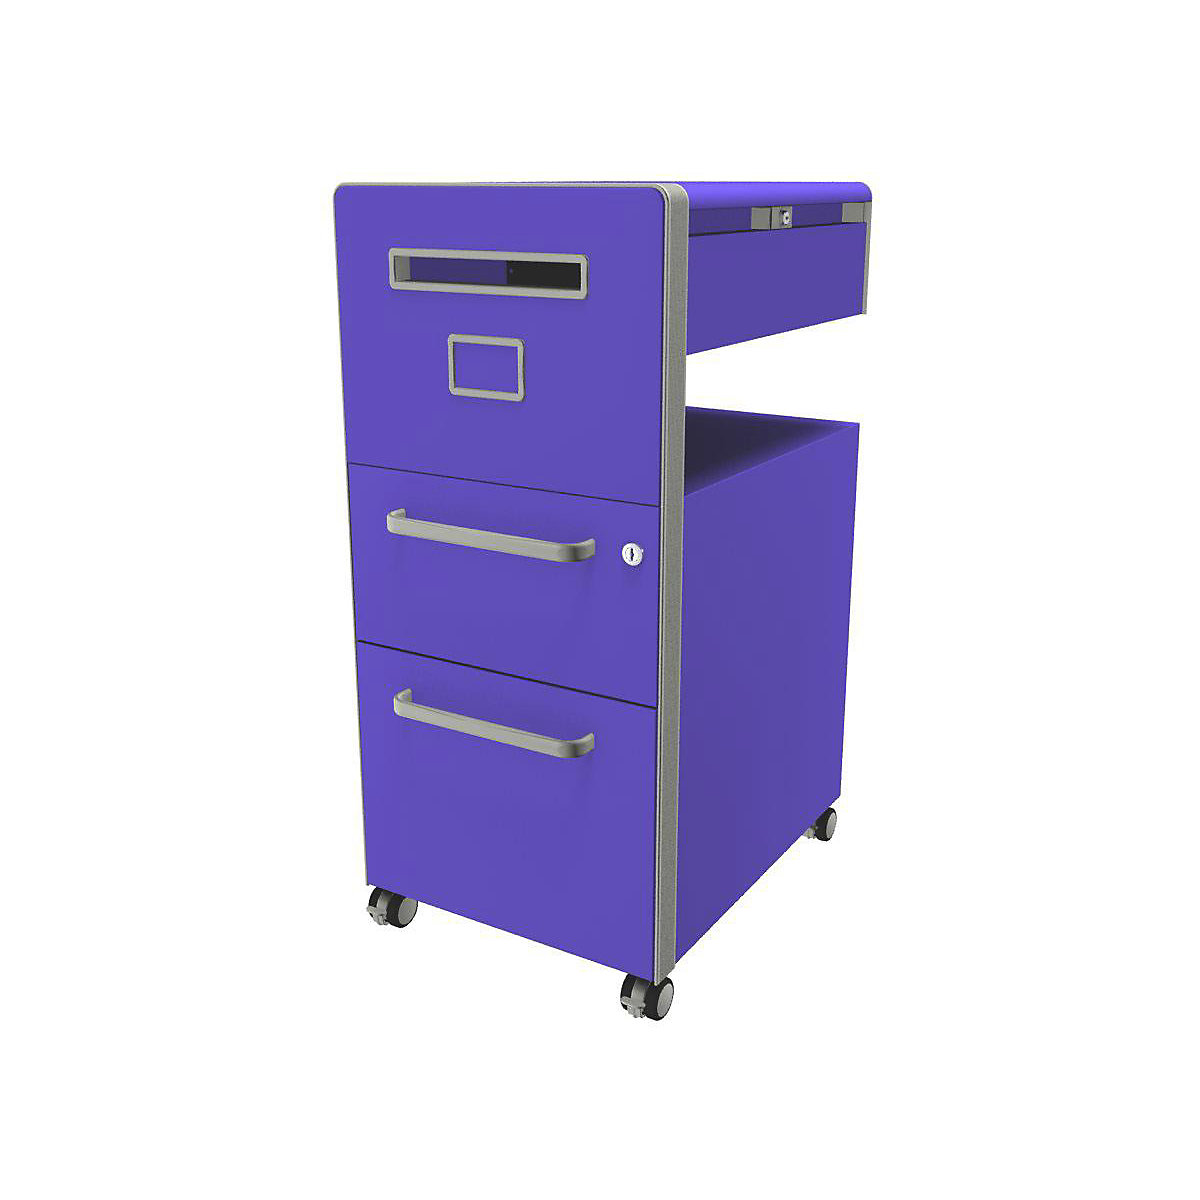 Bite™ pedestal furniture, with 1 pin board, opens on the left side – BISLEY, with 1 universal drawer, 1 suspension file drawer, parma-11